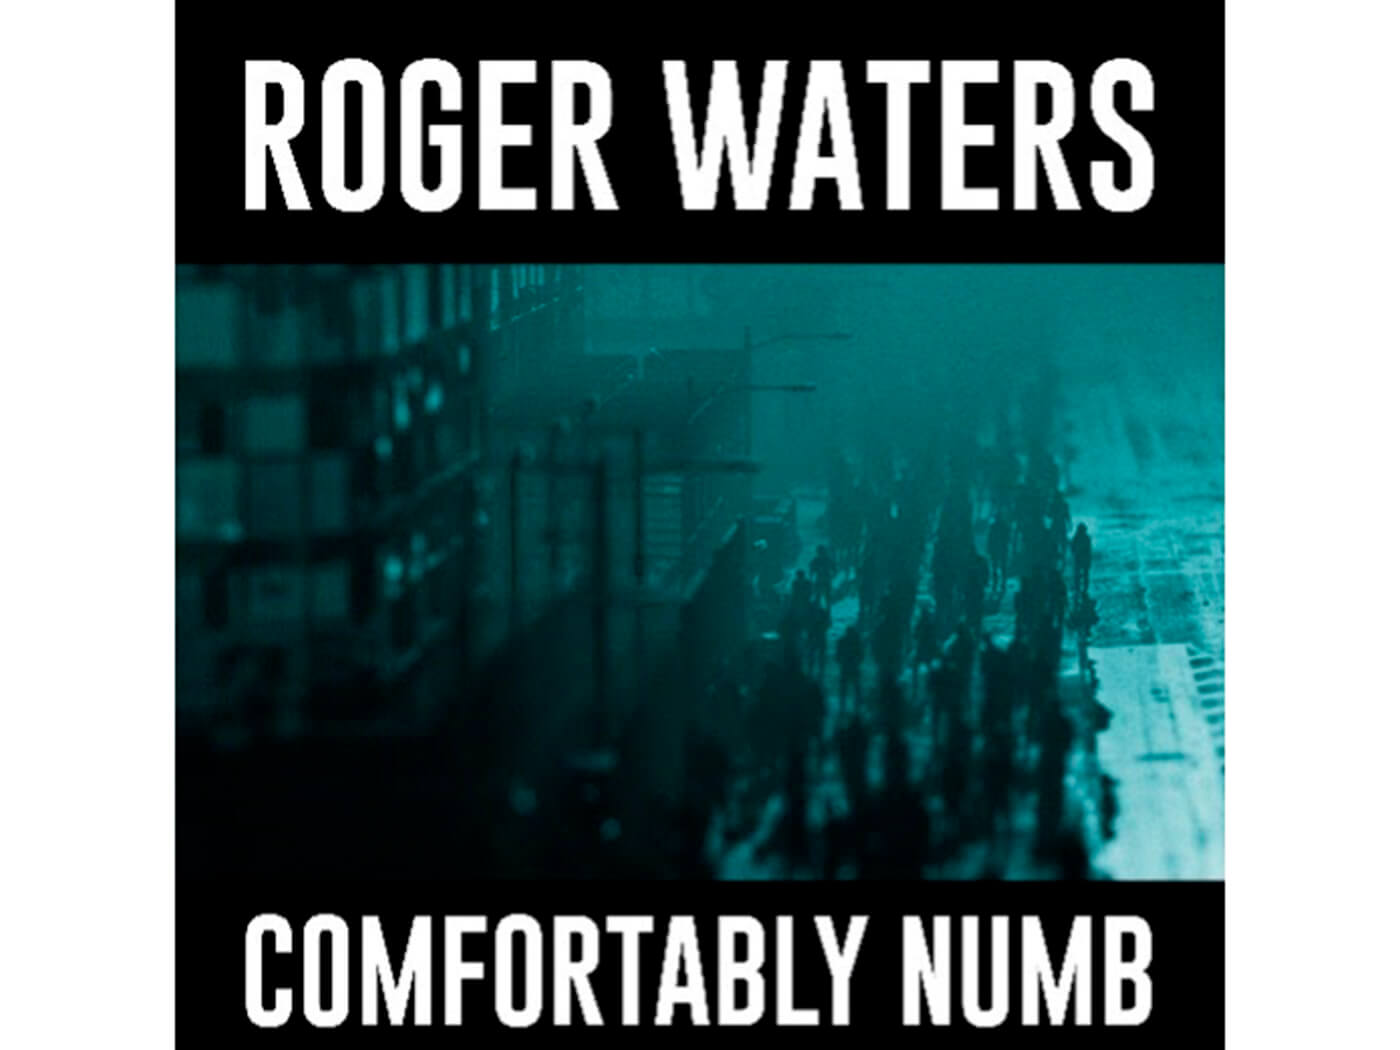 Hear Roger Waters’ new recording of “Comfortably Numb”